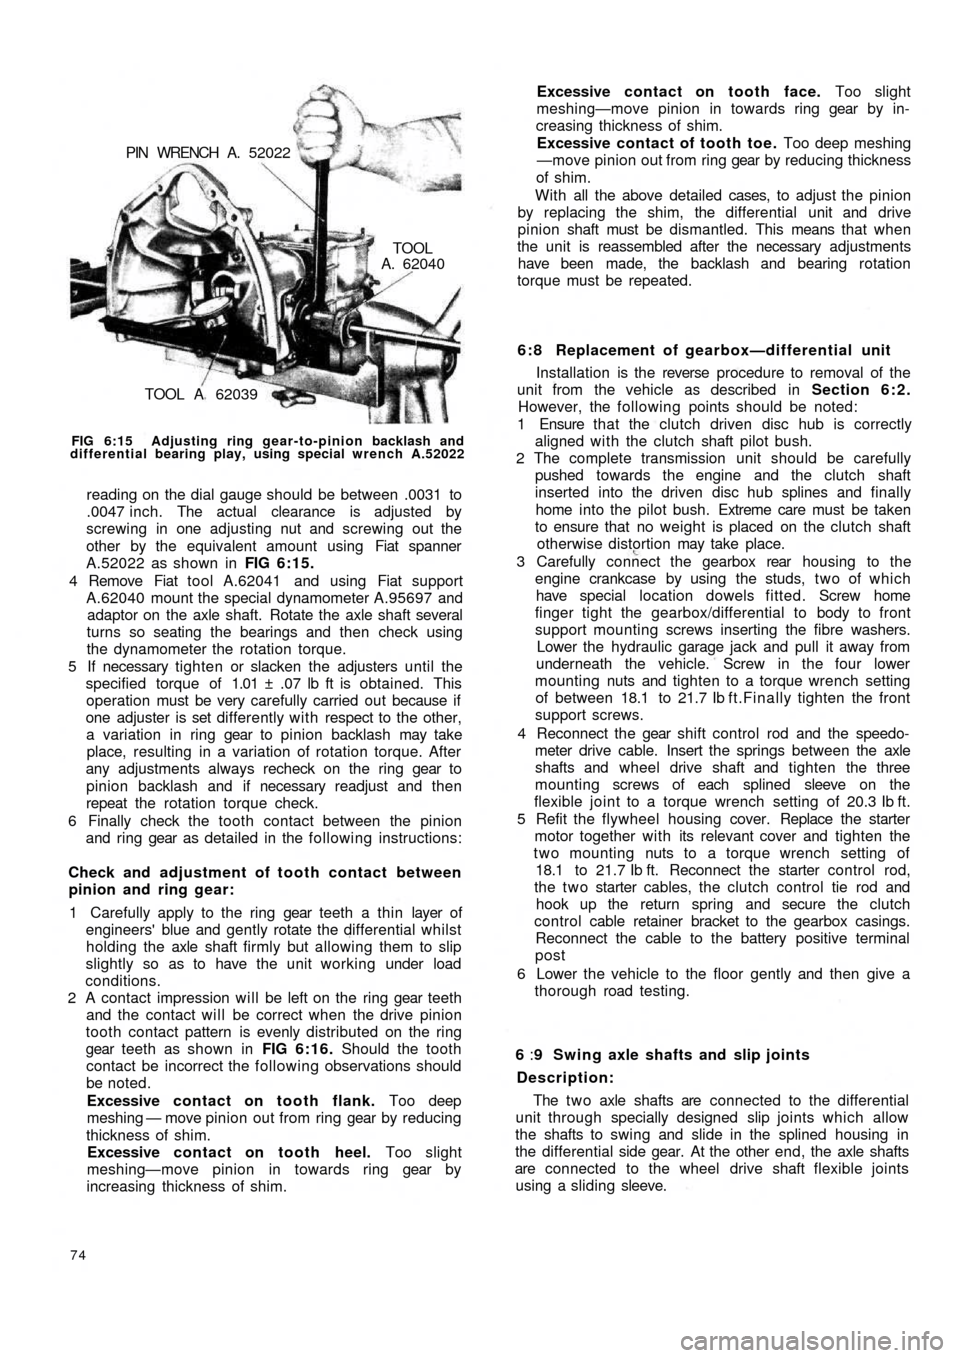 FIAT 500 1973 1.G Workshop Manual TOOL A  62039
TOOLA. 62040 PIN  WRENCH  A.  52022
FIG 6:15  Adjusting ring gear-to-pinion backlash and
differential bearing play, using special wrench A.52022
reading on the dial gauge should be betwe